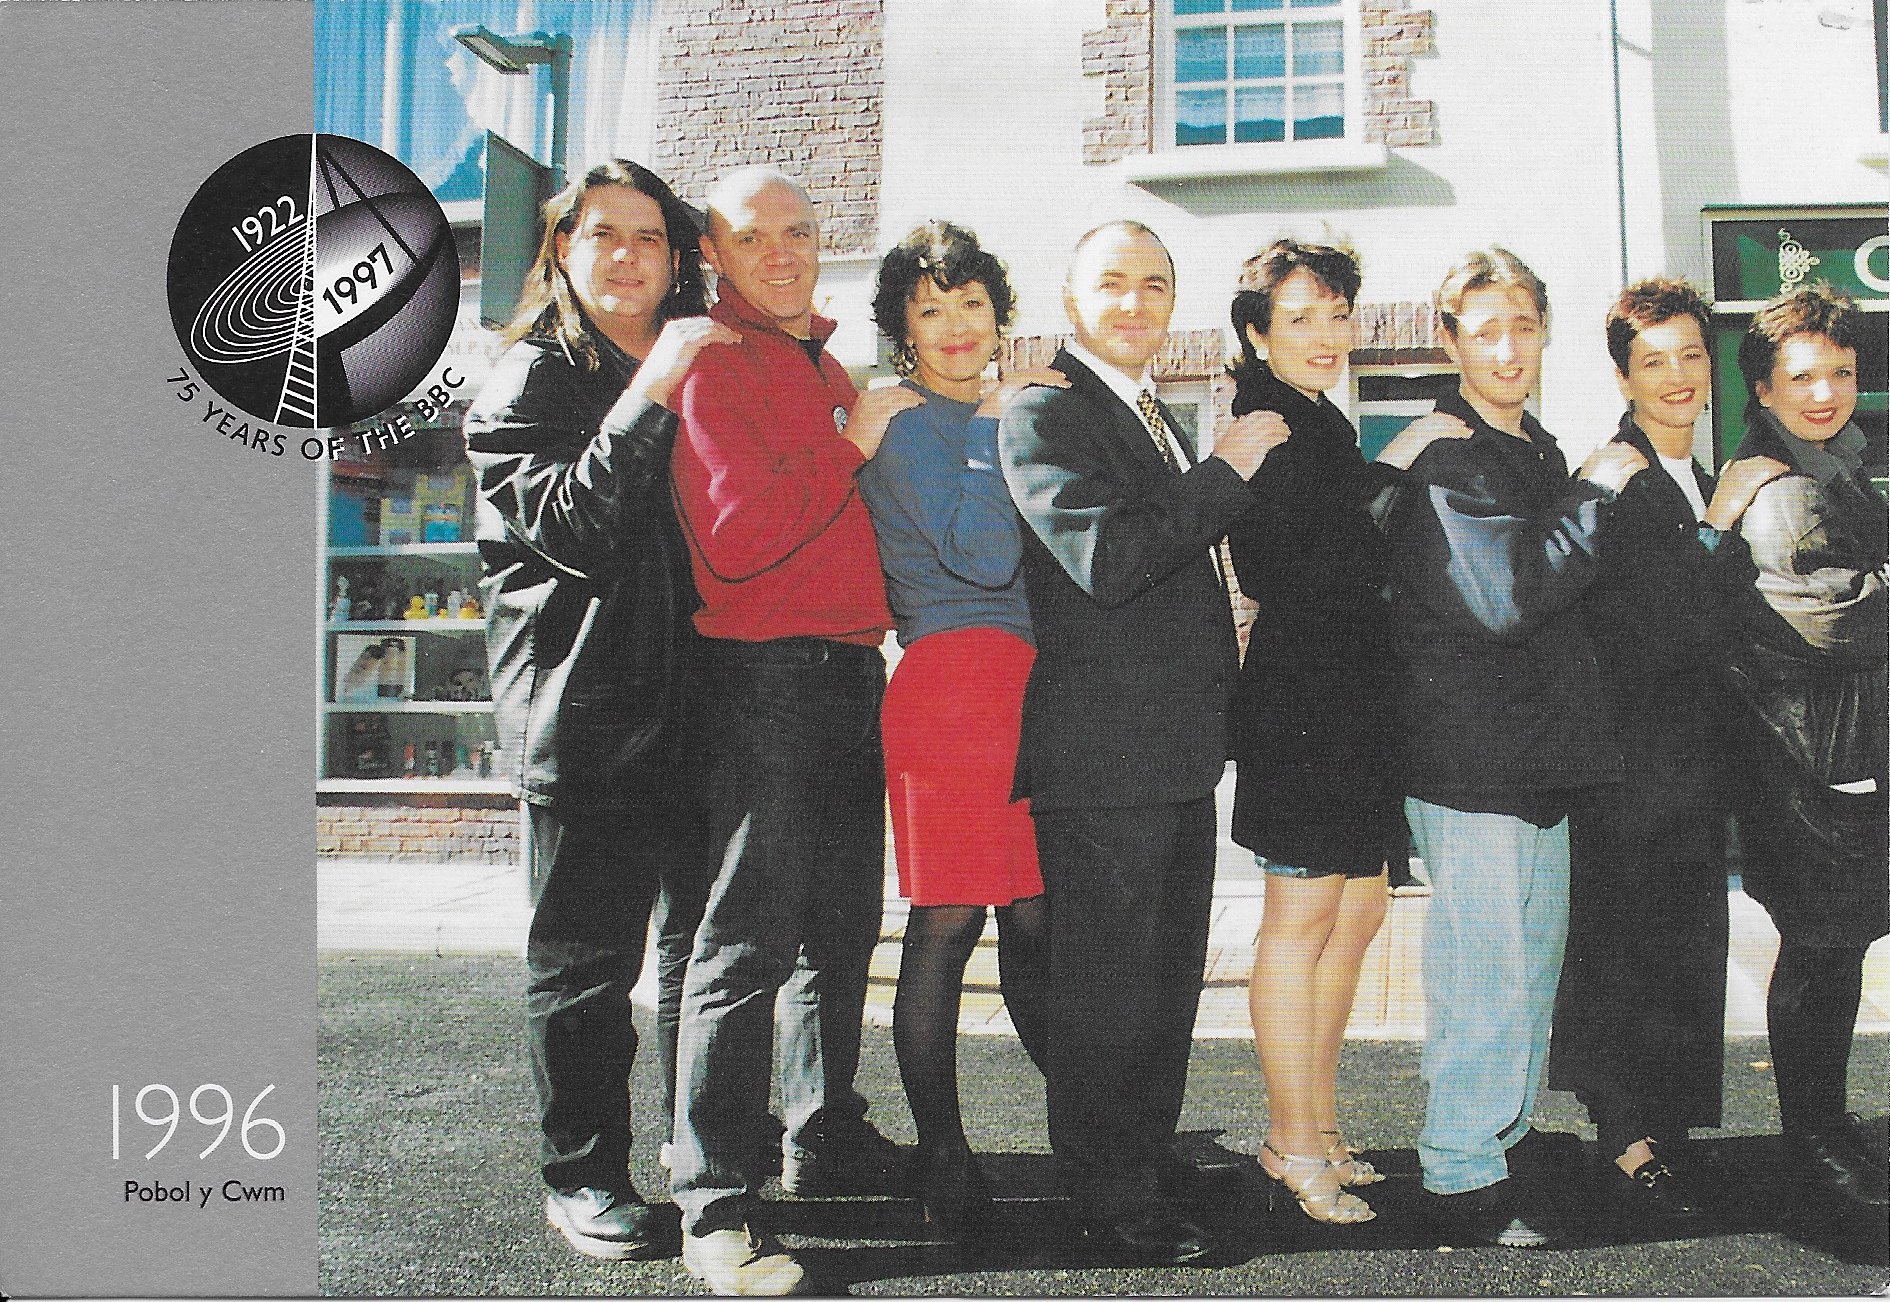 Picture of PC-BBC75-1996 75 years of the BBC - Pobol y Cwm by artist Unknown from the BBC postcards - Records and Tapes library